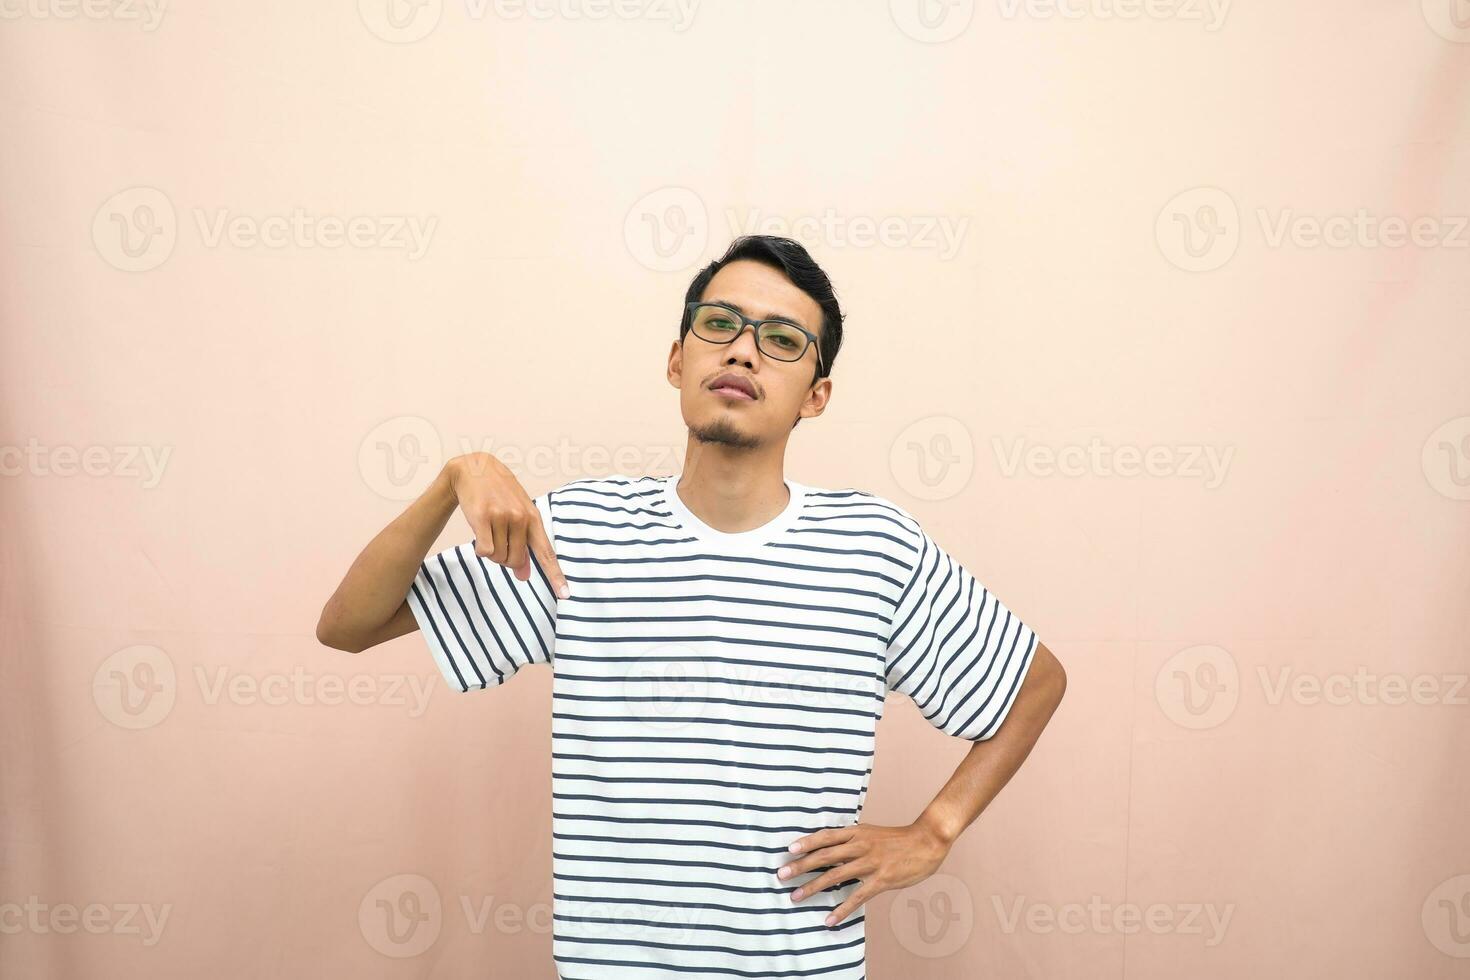 Asian man with glasses wearing casual striped shirt, whispering pose while pointing down. Isolated beige background. photo